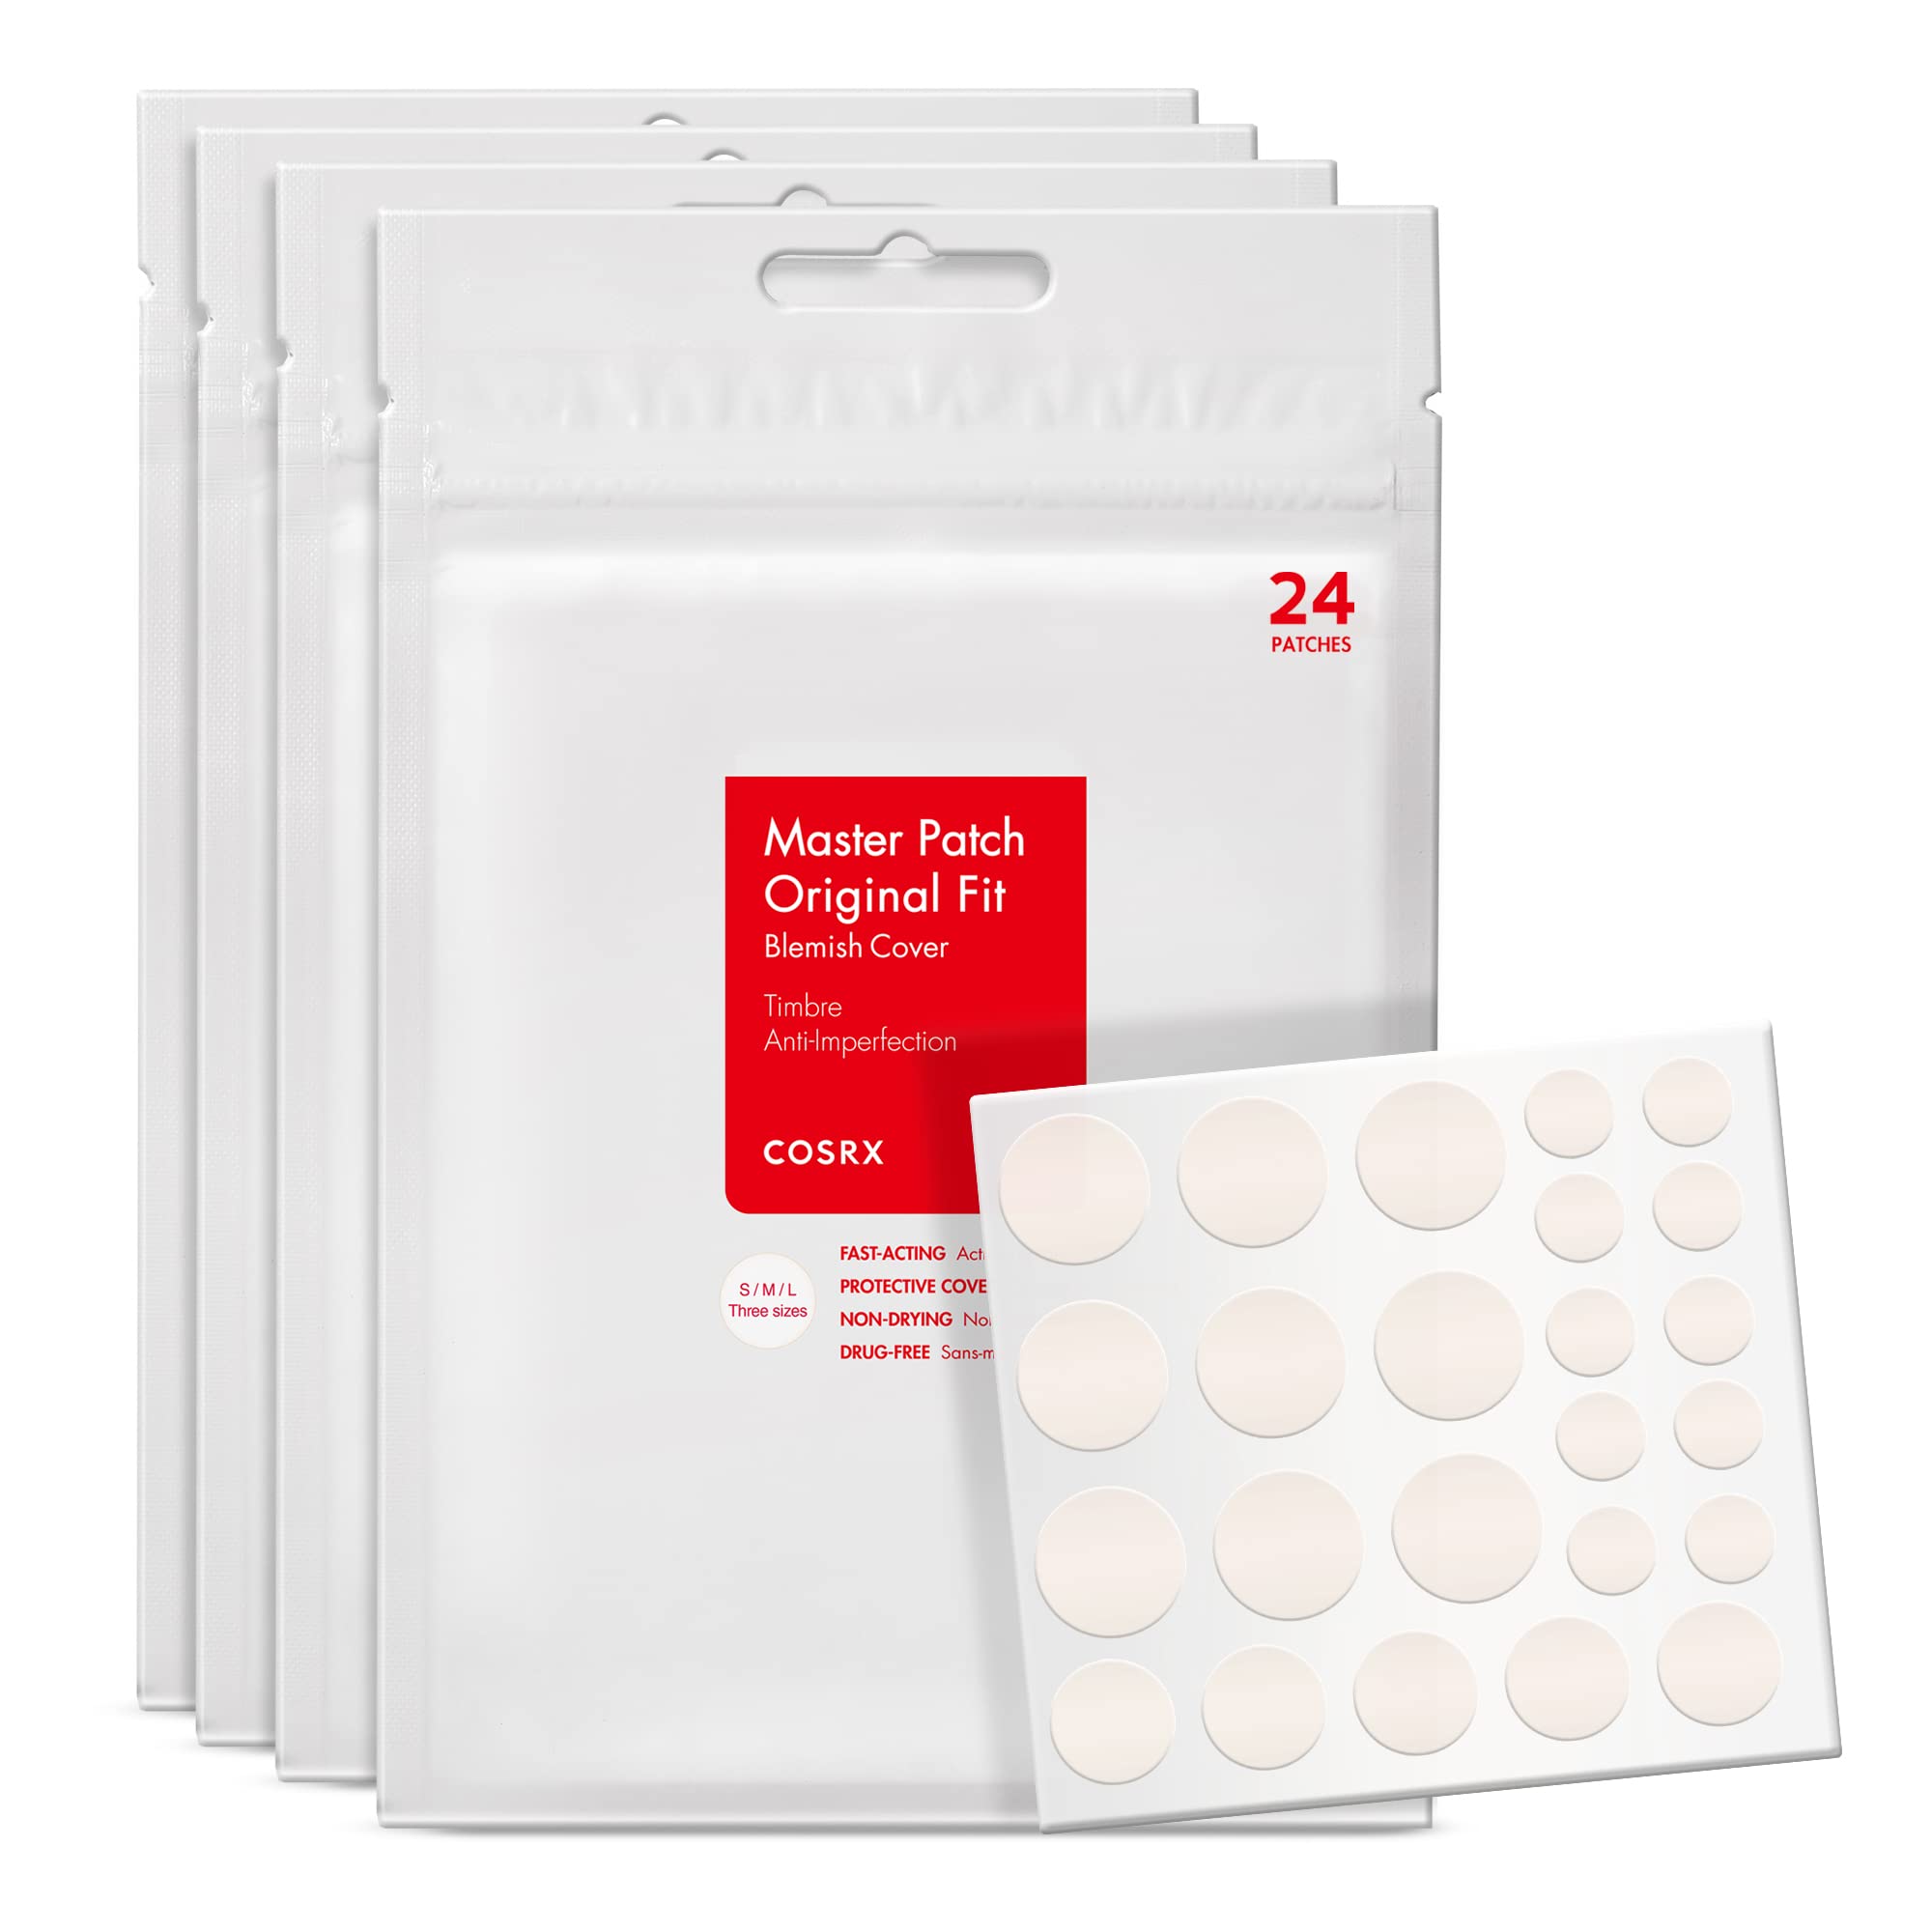 COSRX Master Patch Original Fit (96 counts) Absorbing Hydrocolloid Spot Treatment Fast Healing, Blemish Cover, 3 Sizes